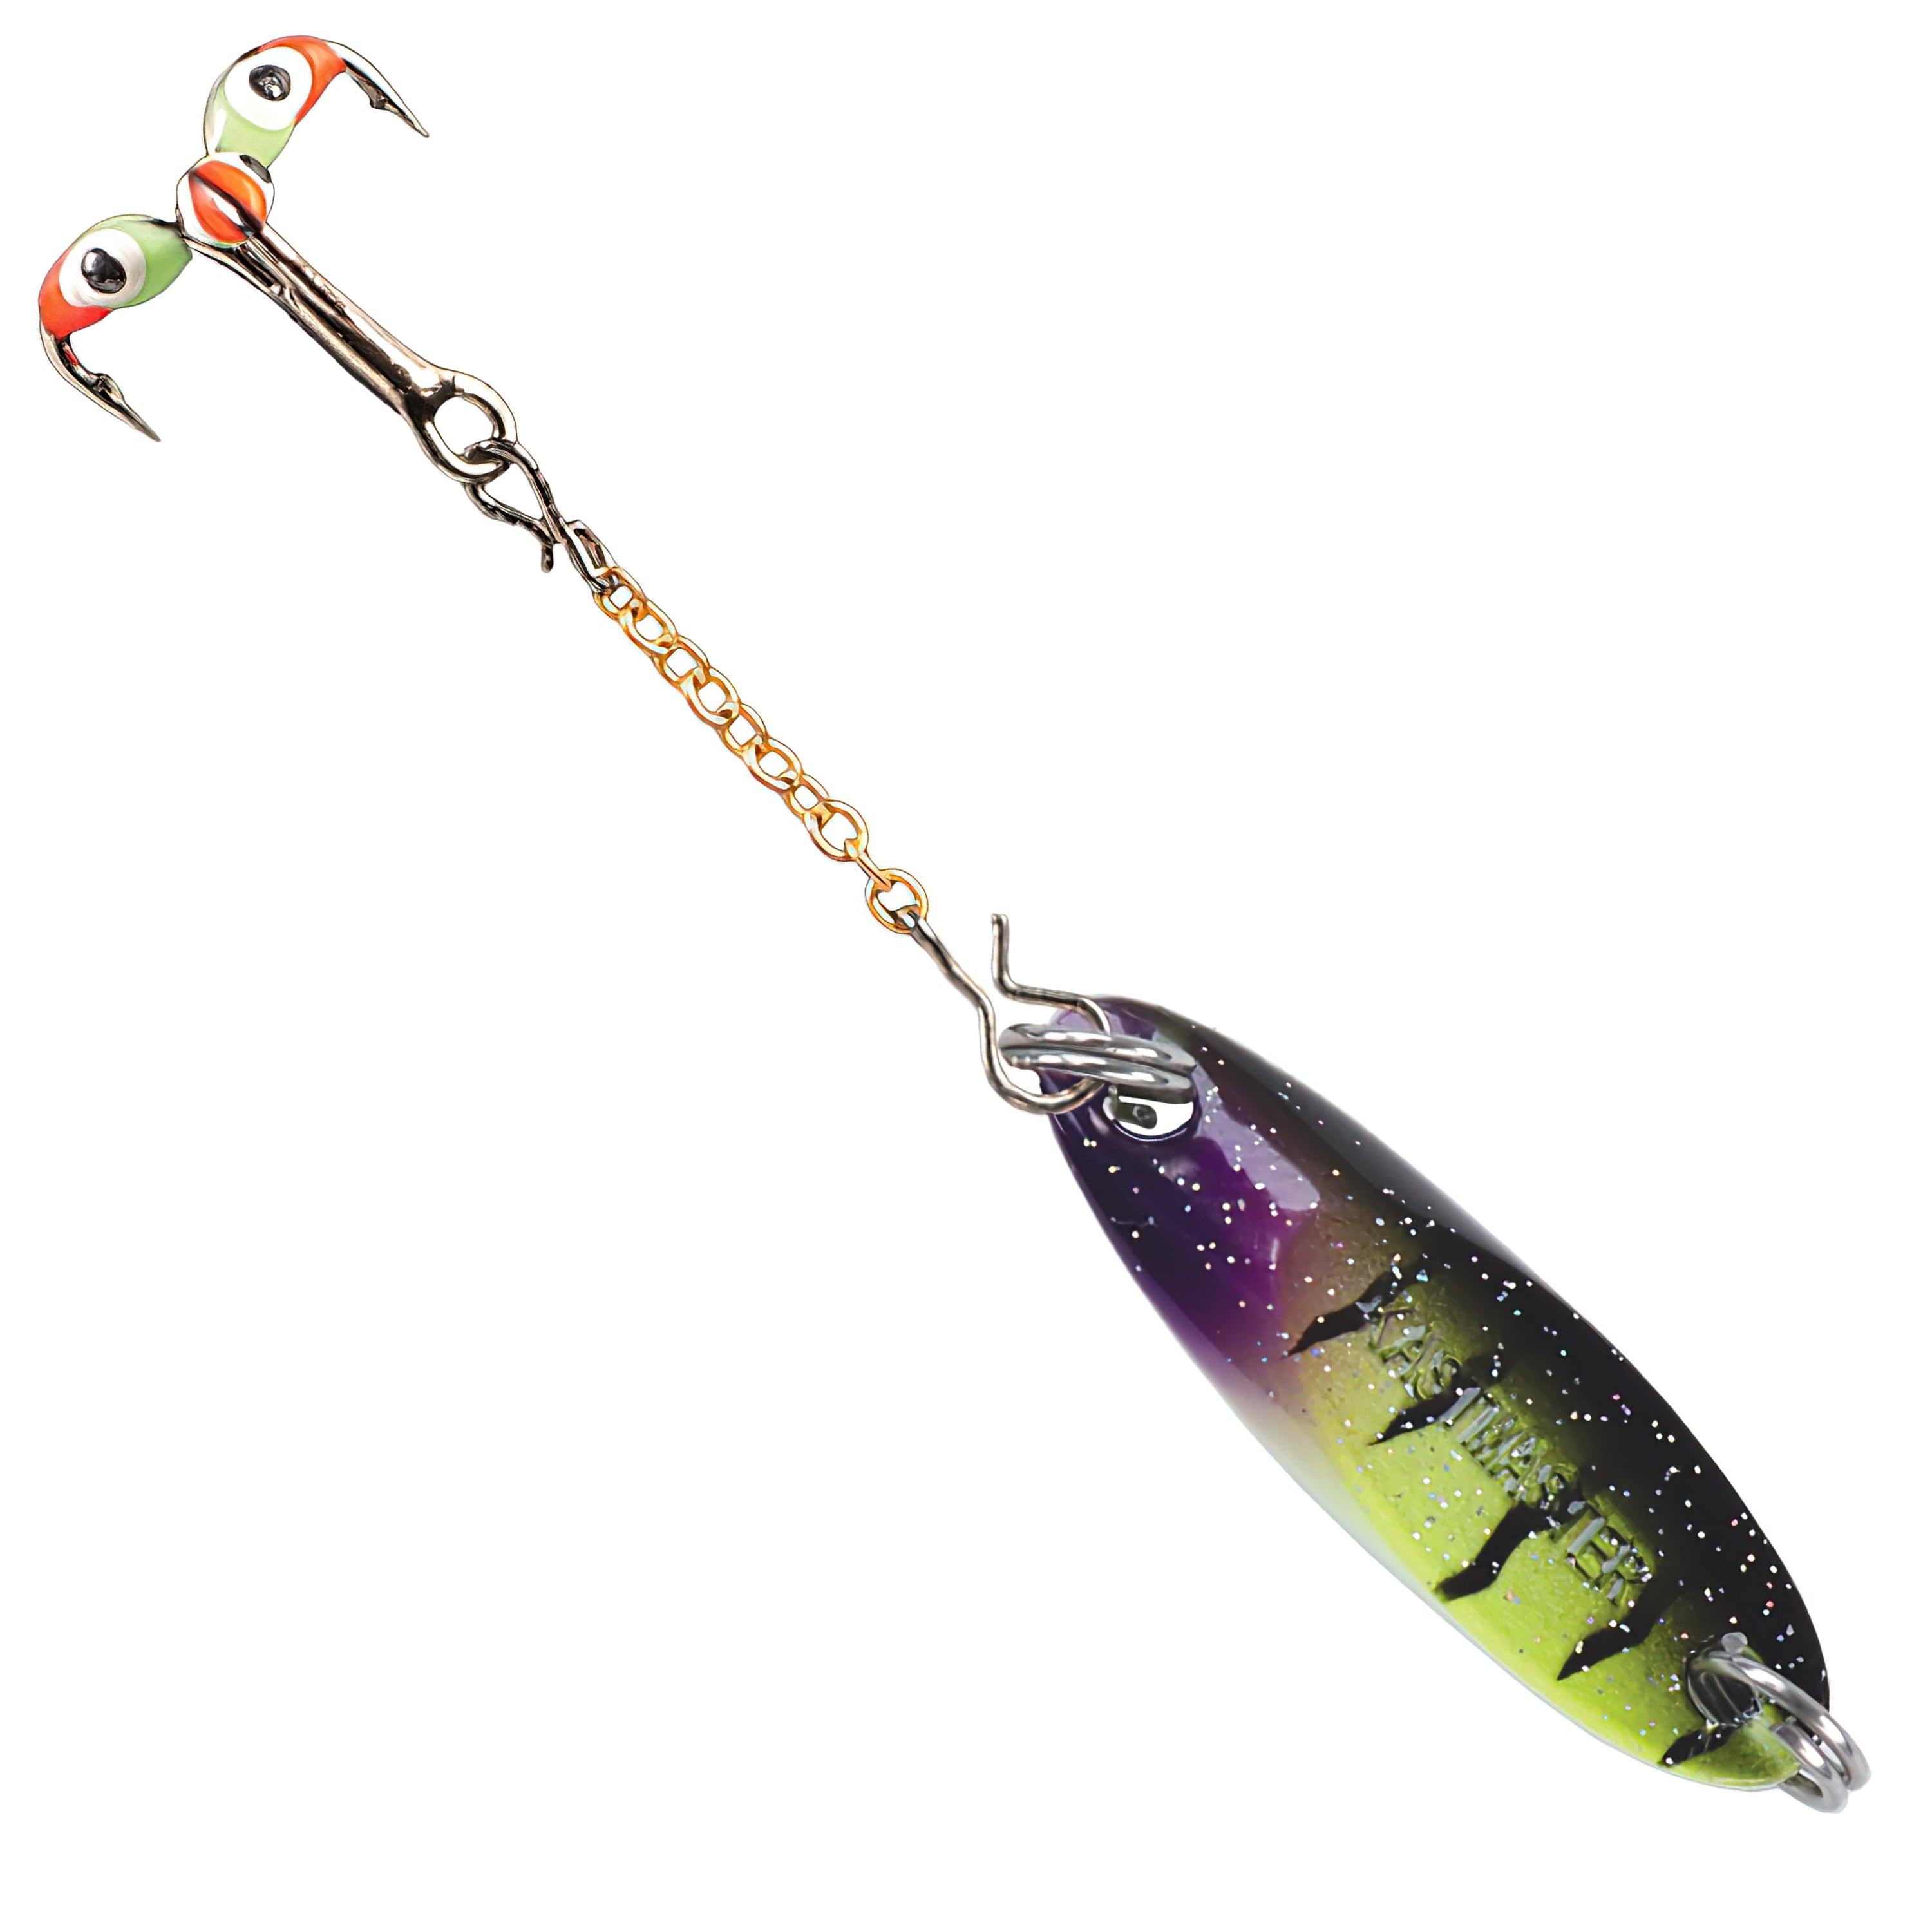 Acme Tackle - D-Chain Kastmaster Featuring Glow Eye Hooks - Acme